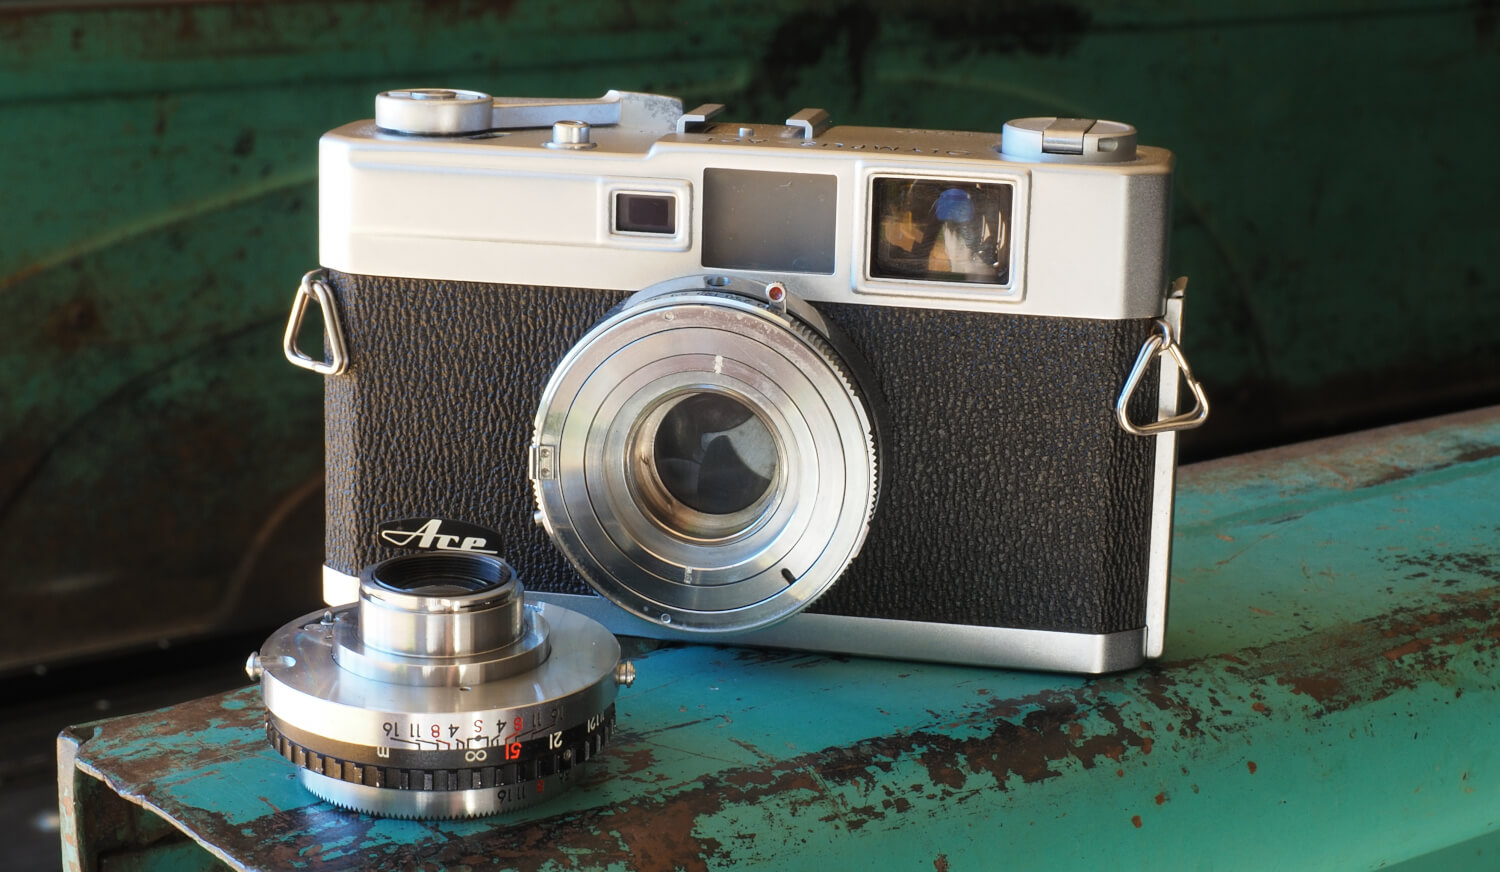 The Olympus Ace's Copal SV leaf shutter and the unique Ace lens mount.